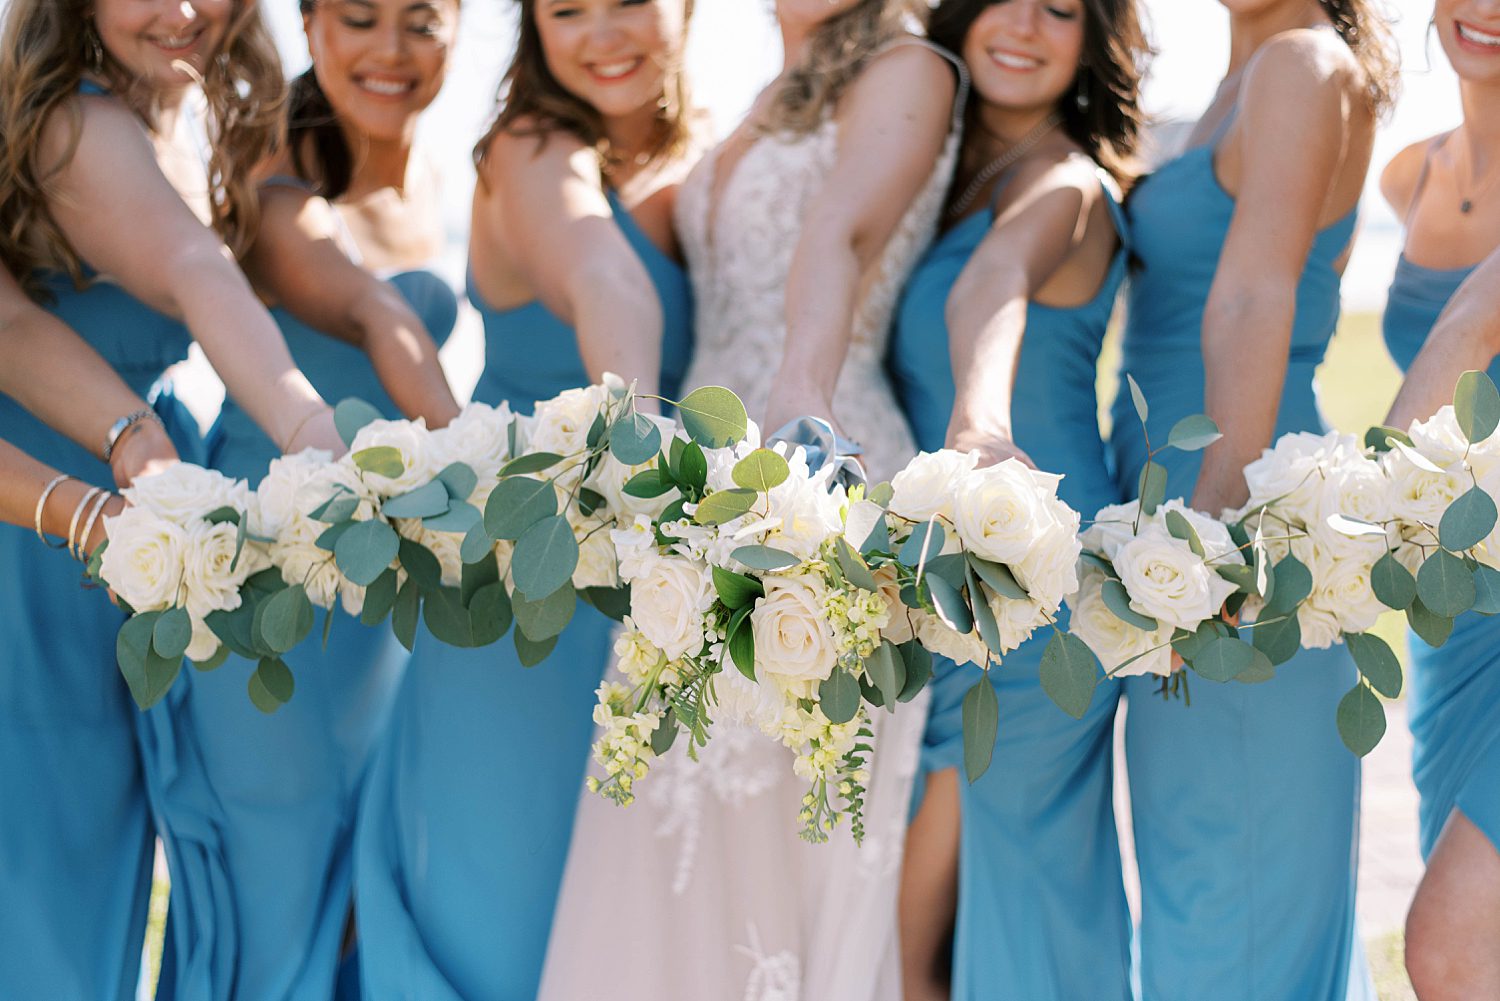 bride and bridesmaids in blue gowns hold white bouquets